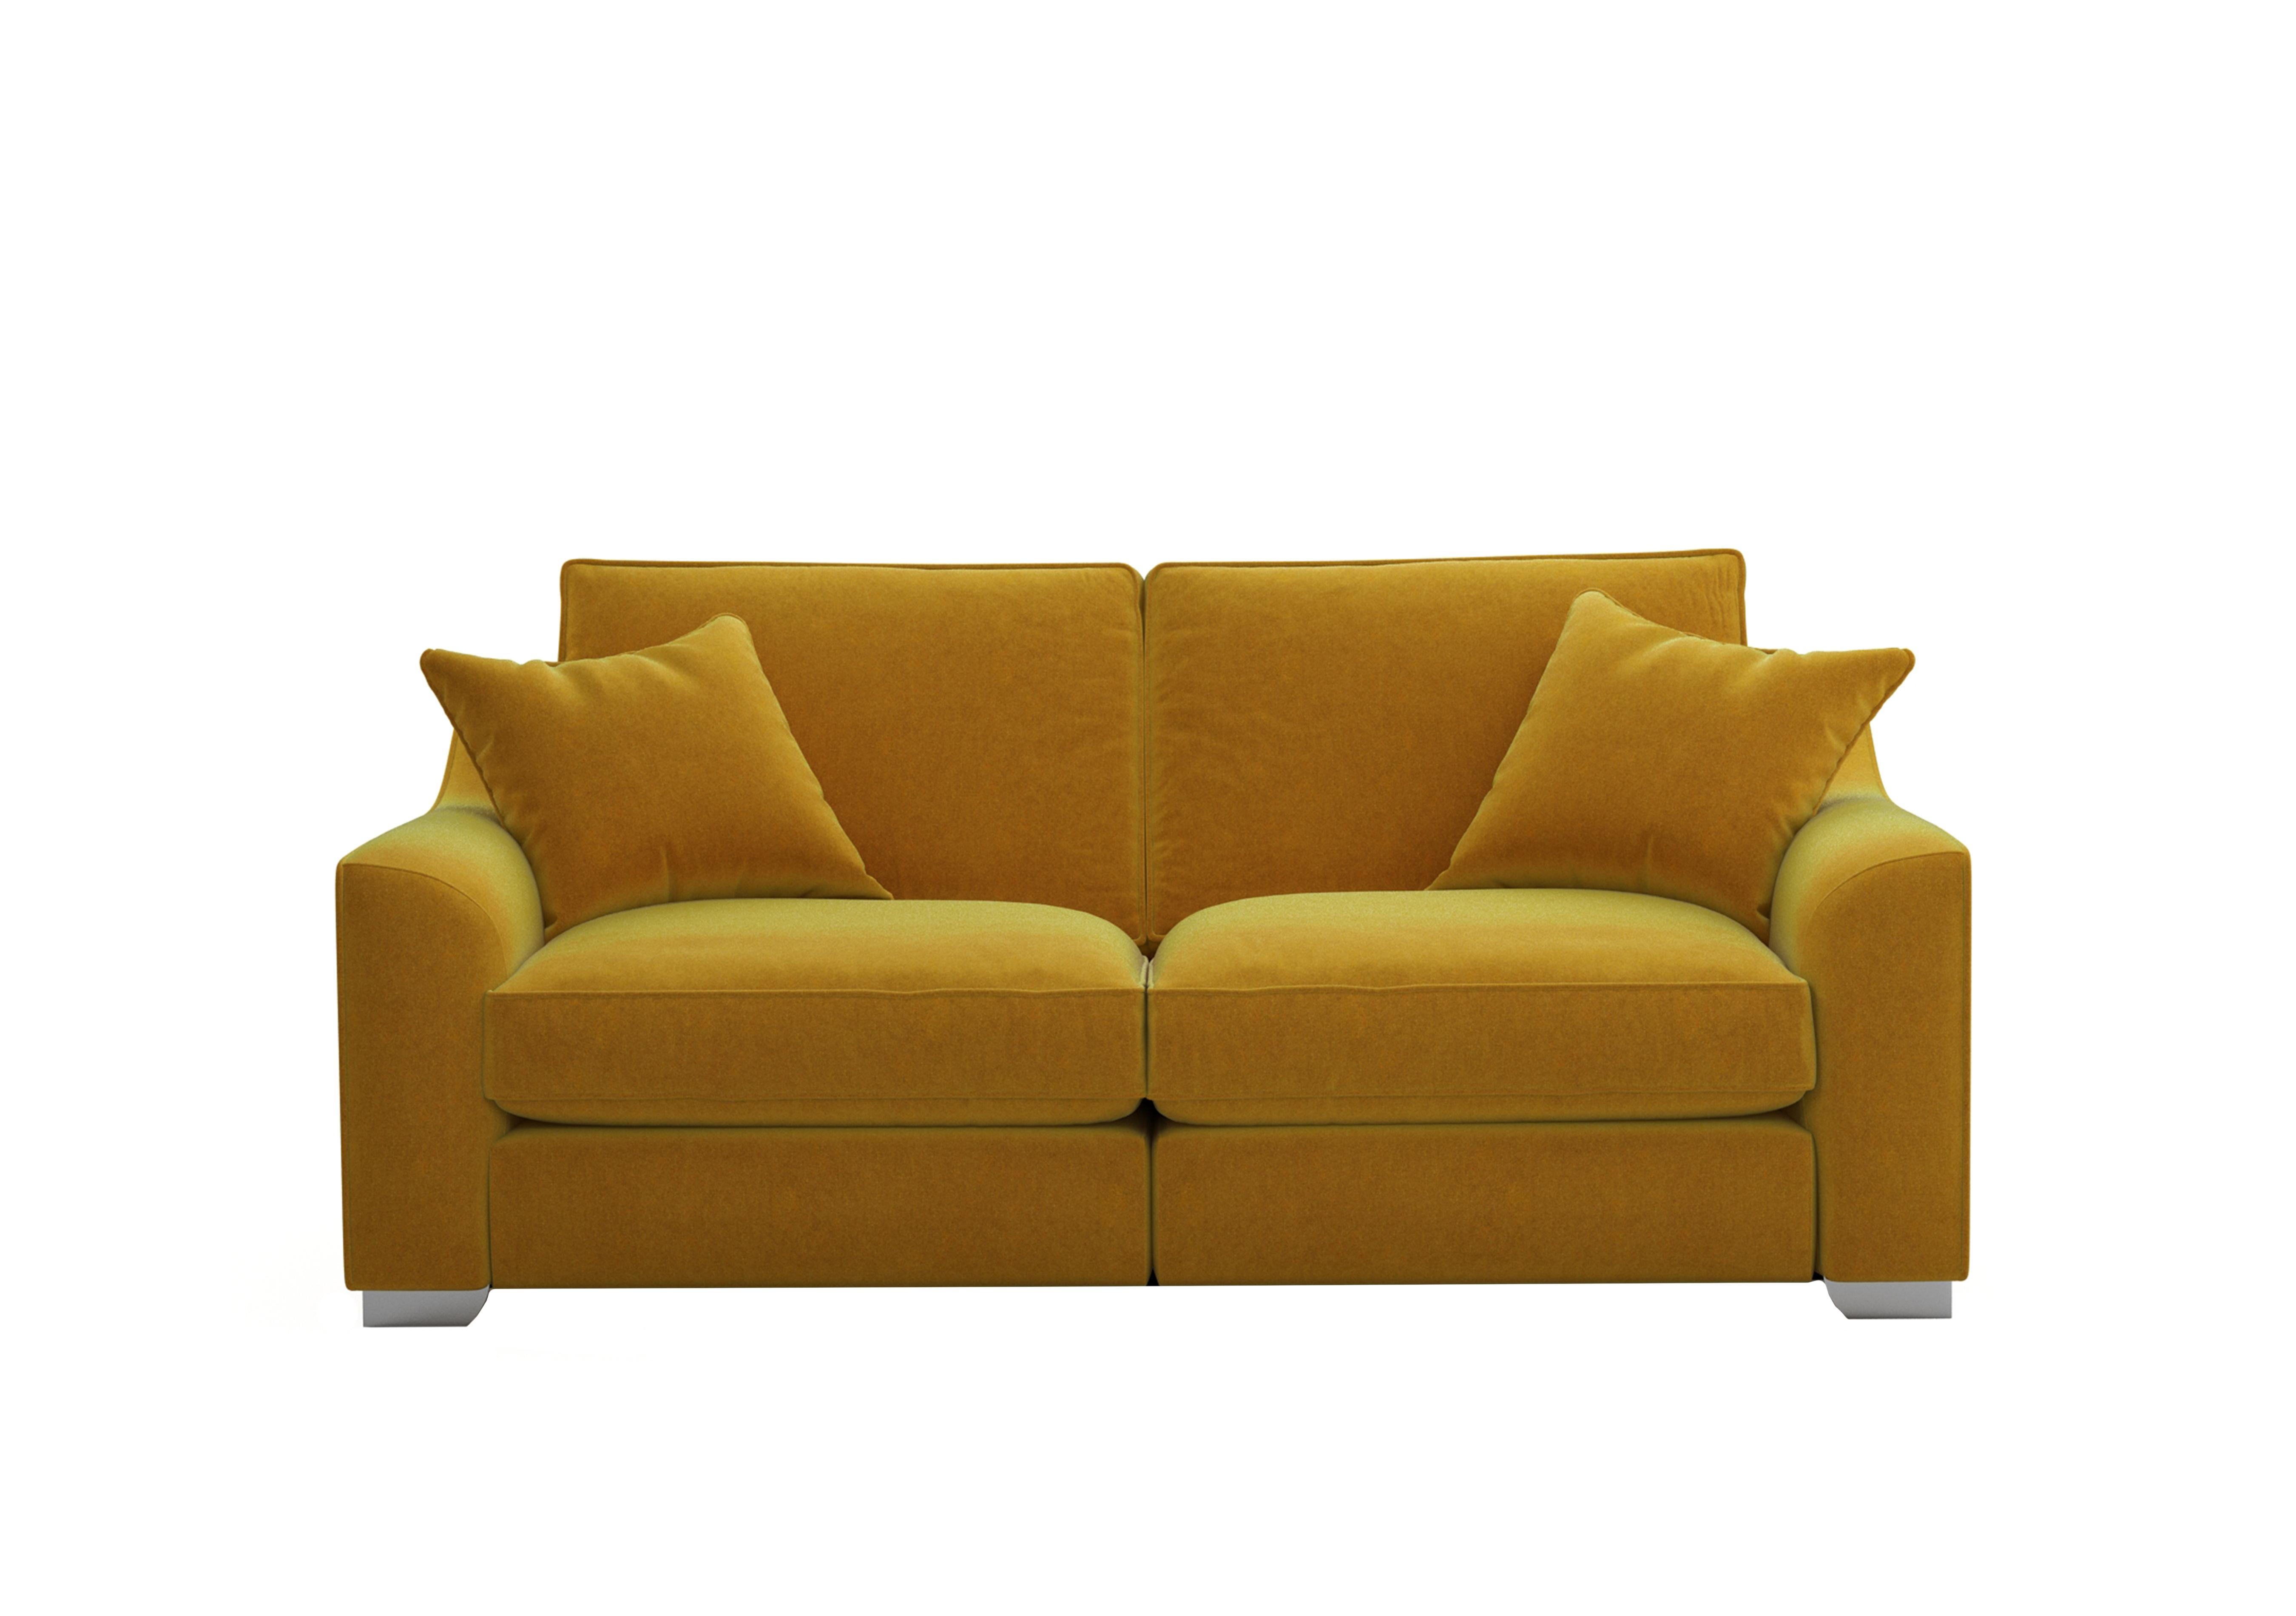 Isobel 3 Seater Fabric Sofa in Gol204 Golden Spice Ch Ft on Furniture Village